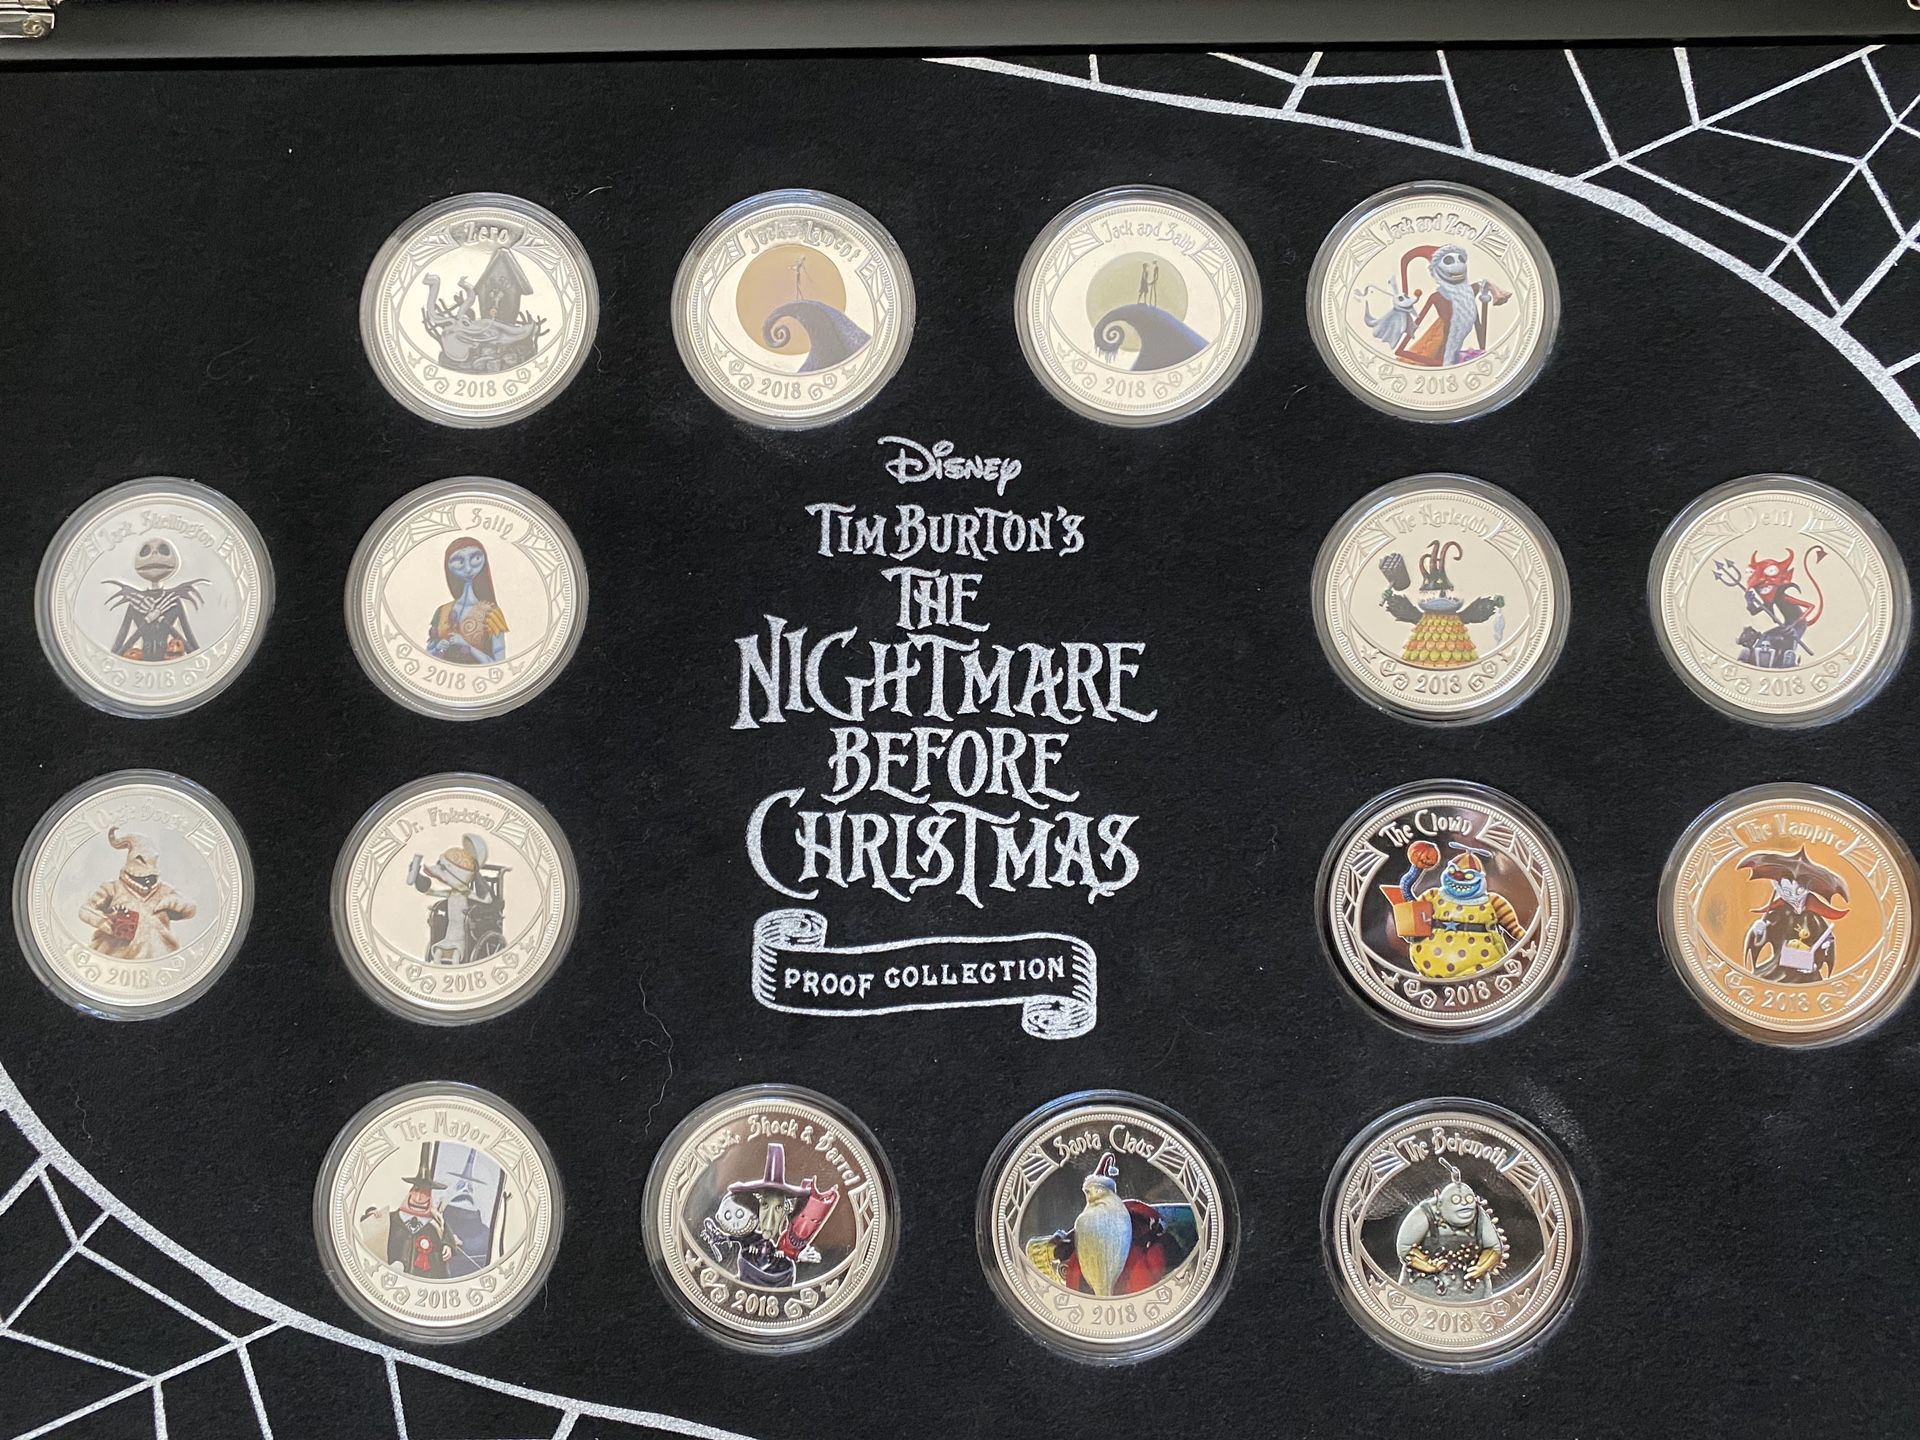 2018 Nightmare Before Christmas Proof Collection